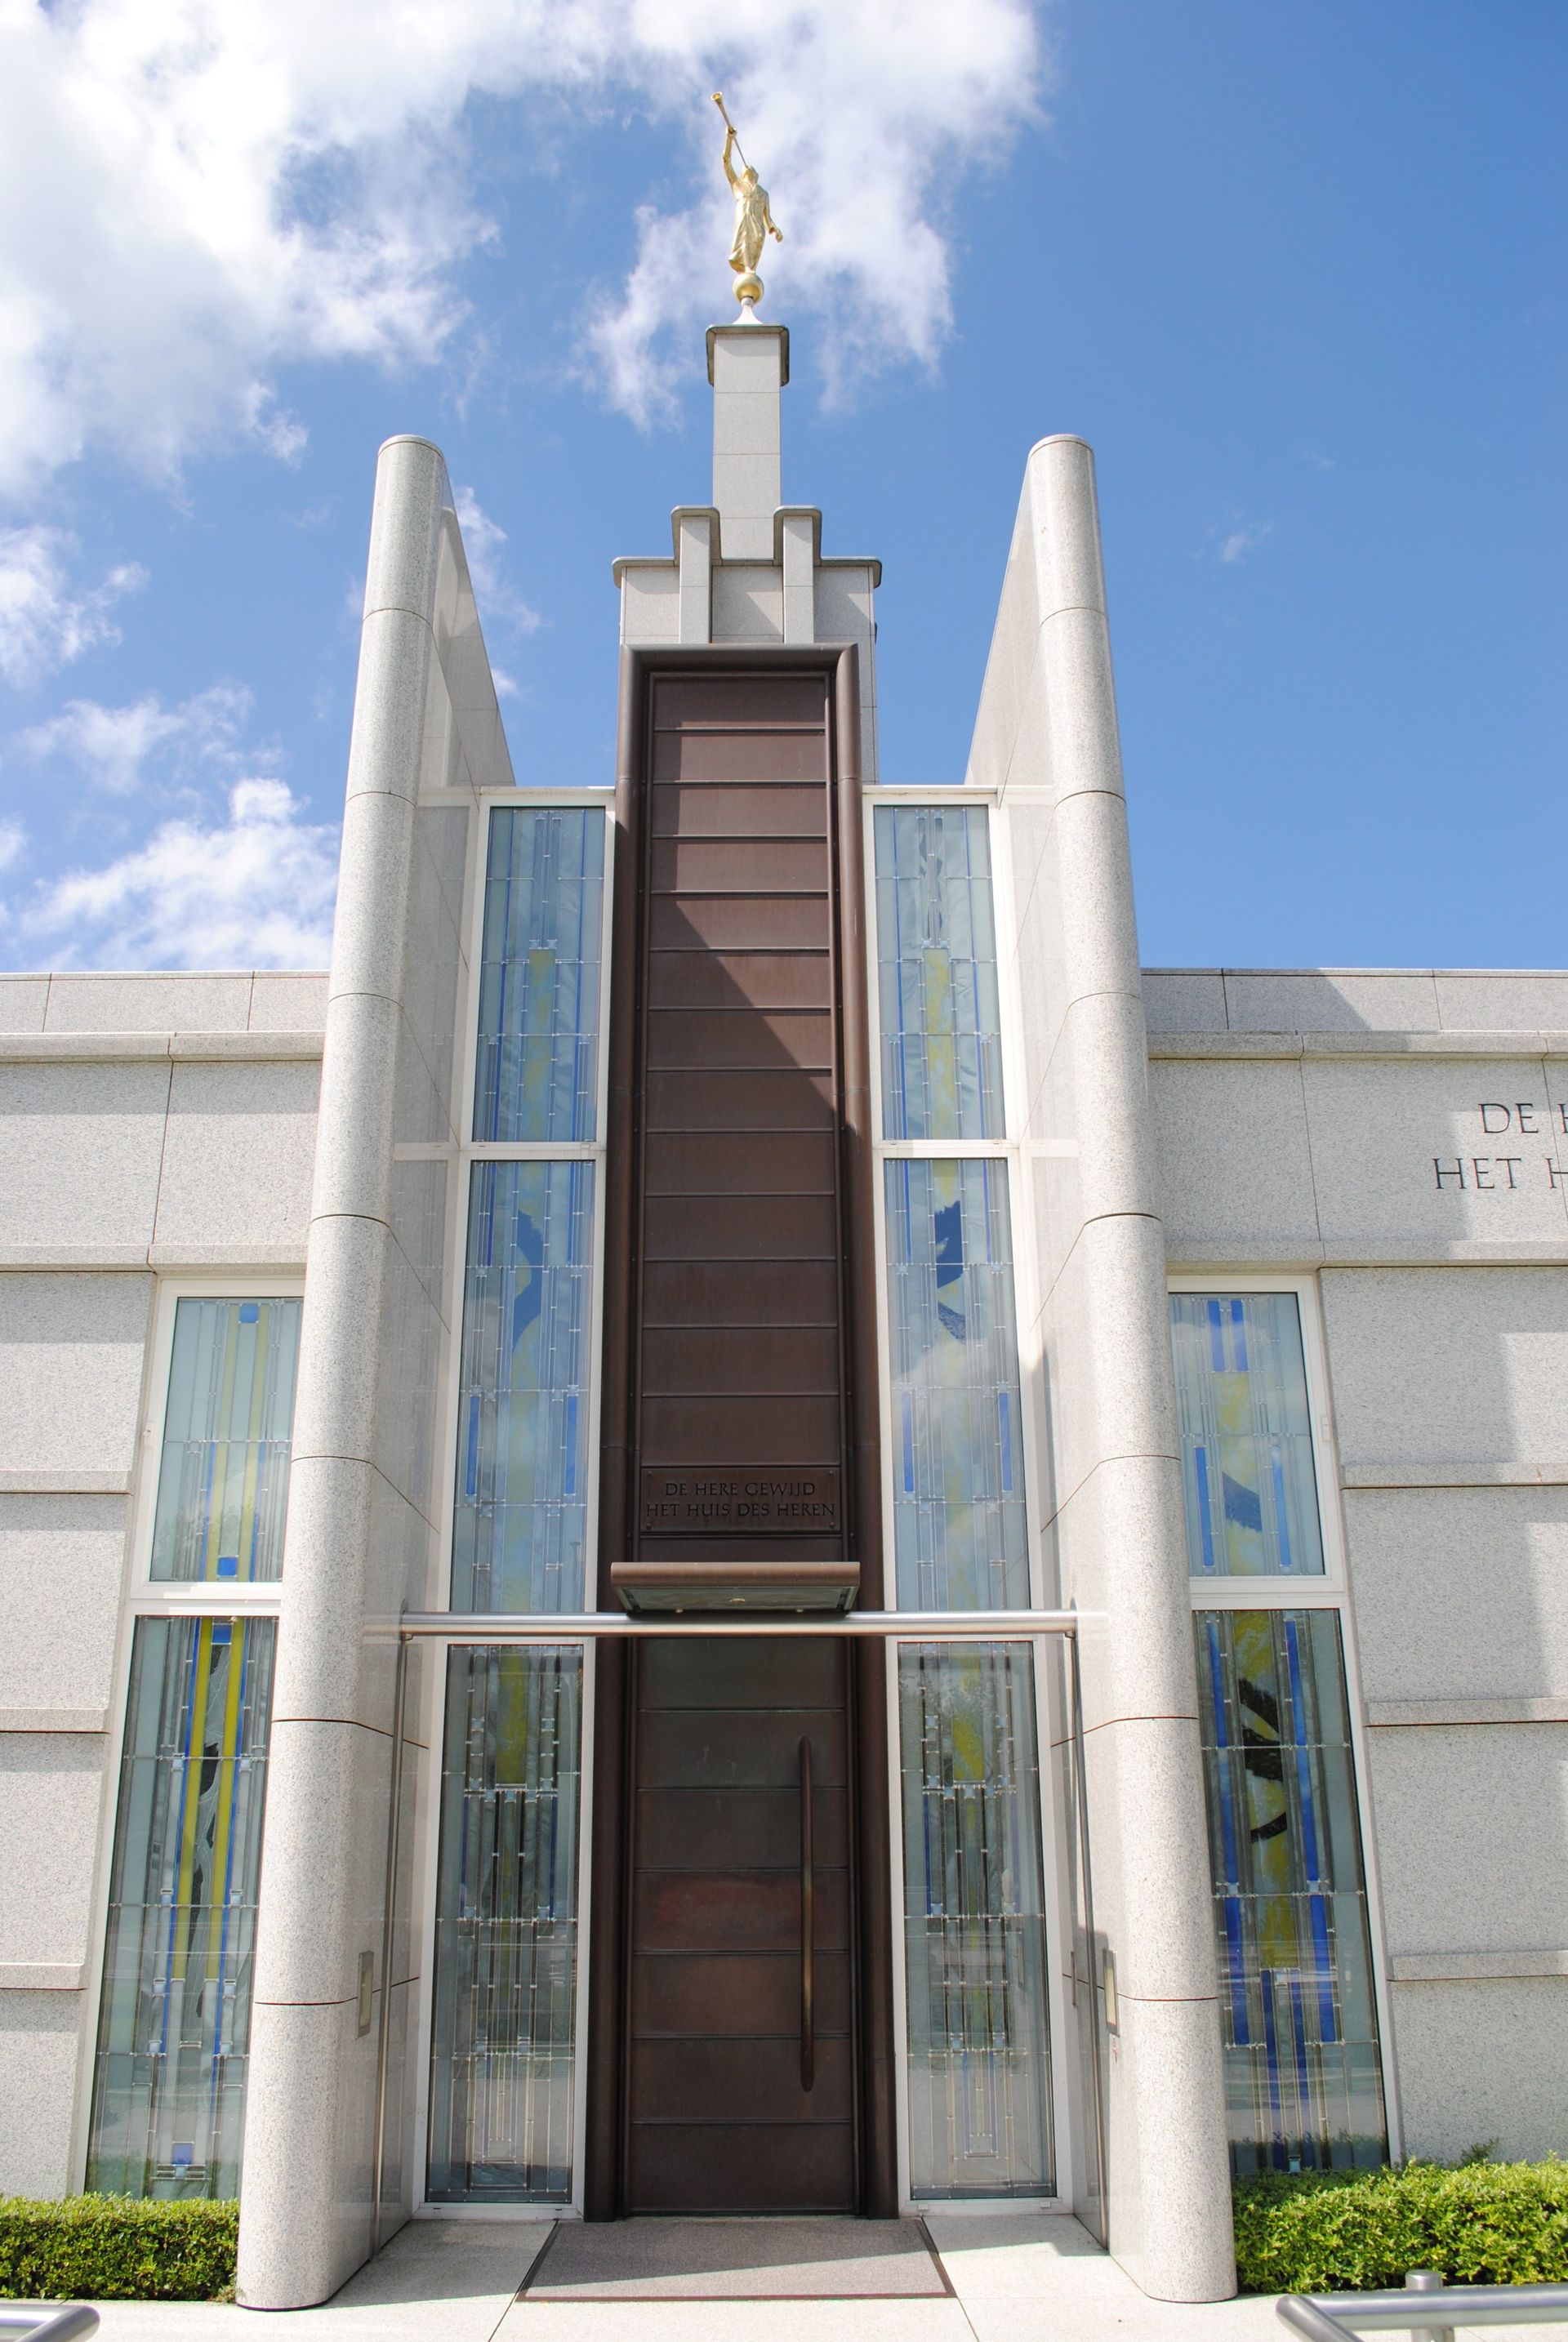 The Hague Netherlands Temple windows, including the door and spire.